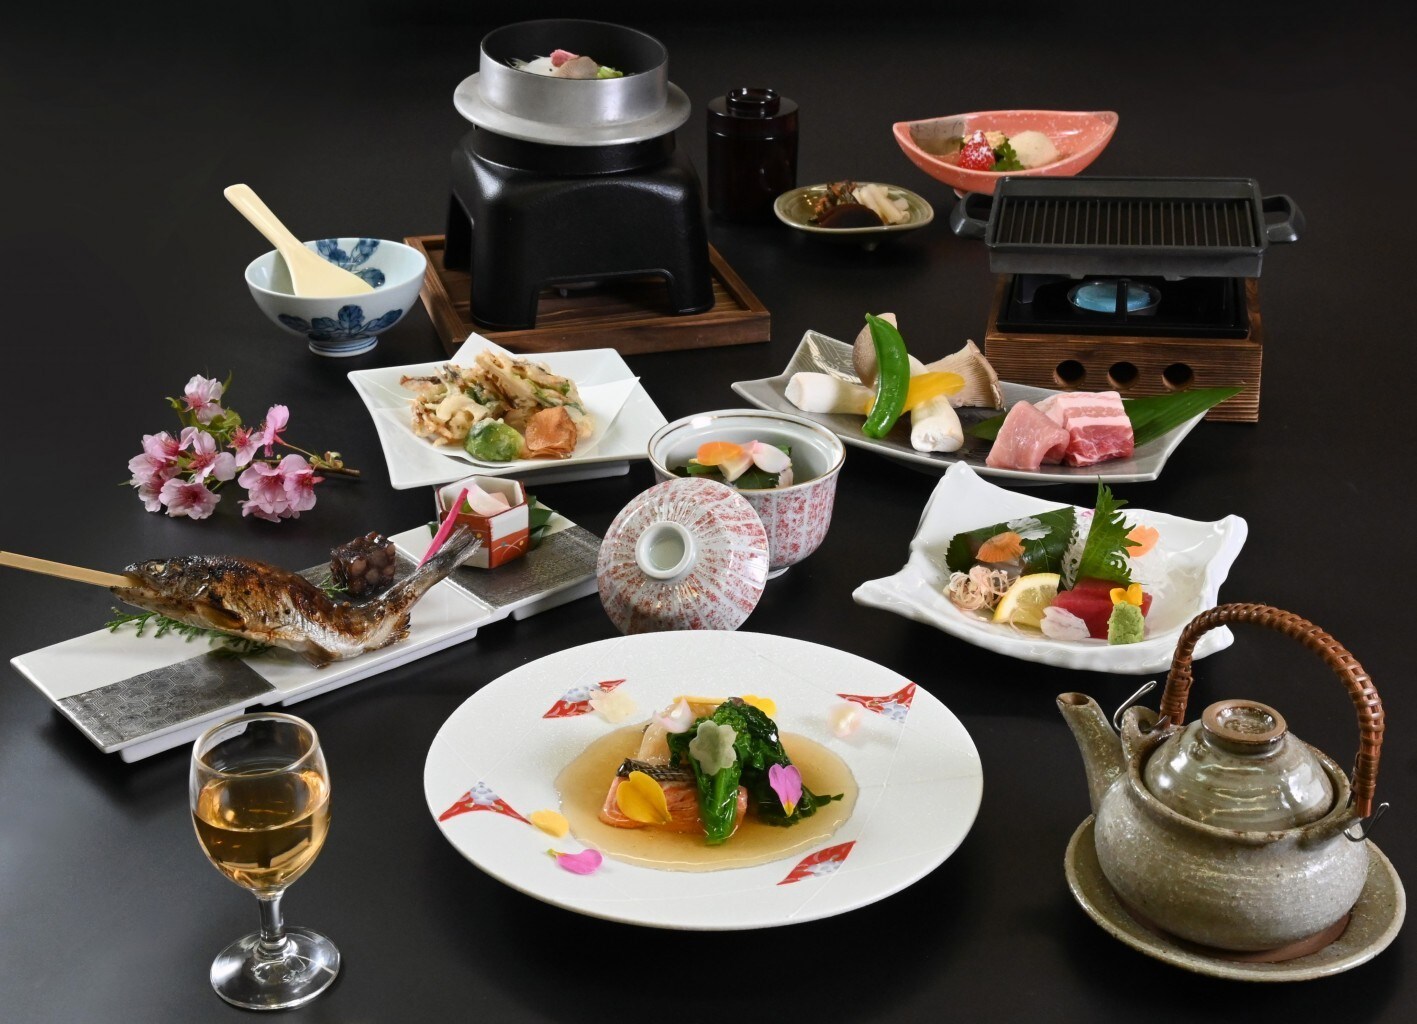 It is an image photograph of the four seasons kaiseki in the spring of 2022.